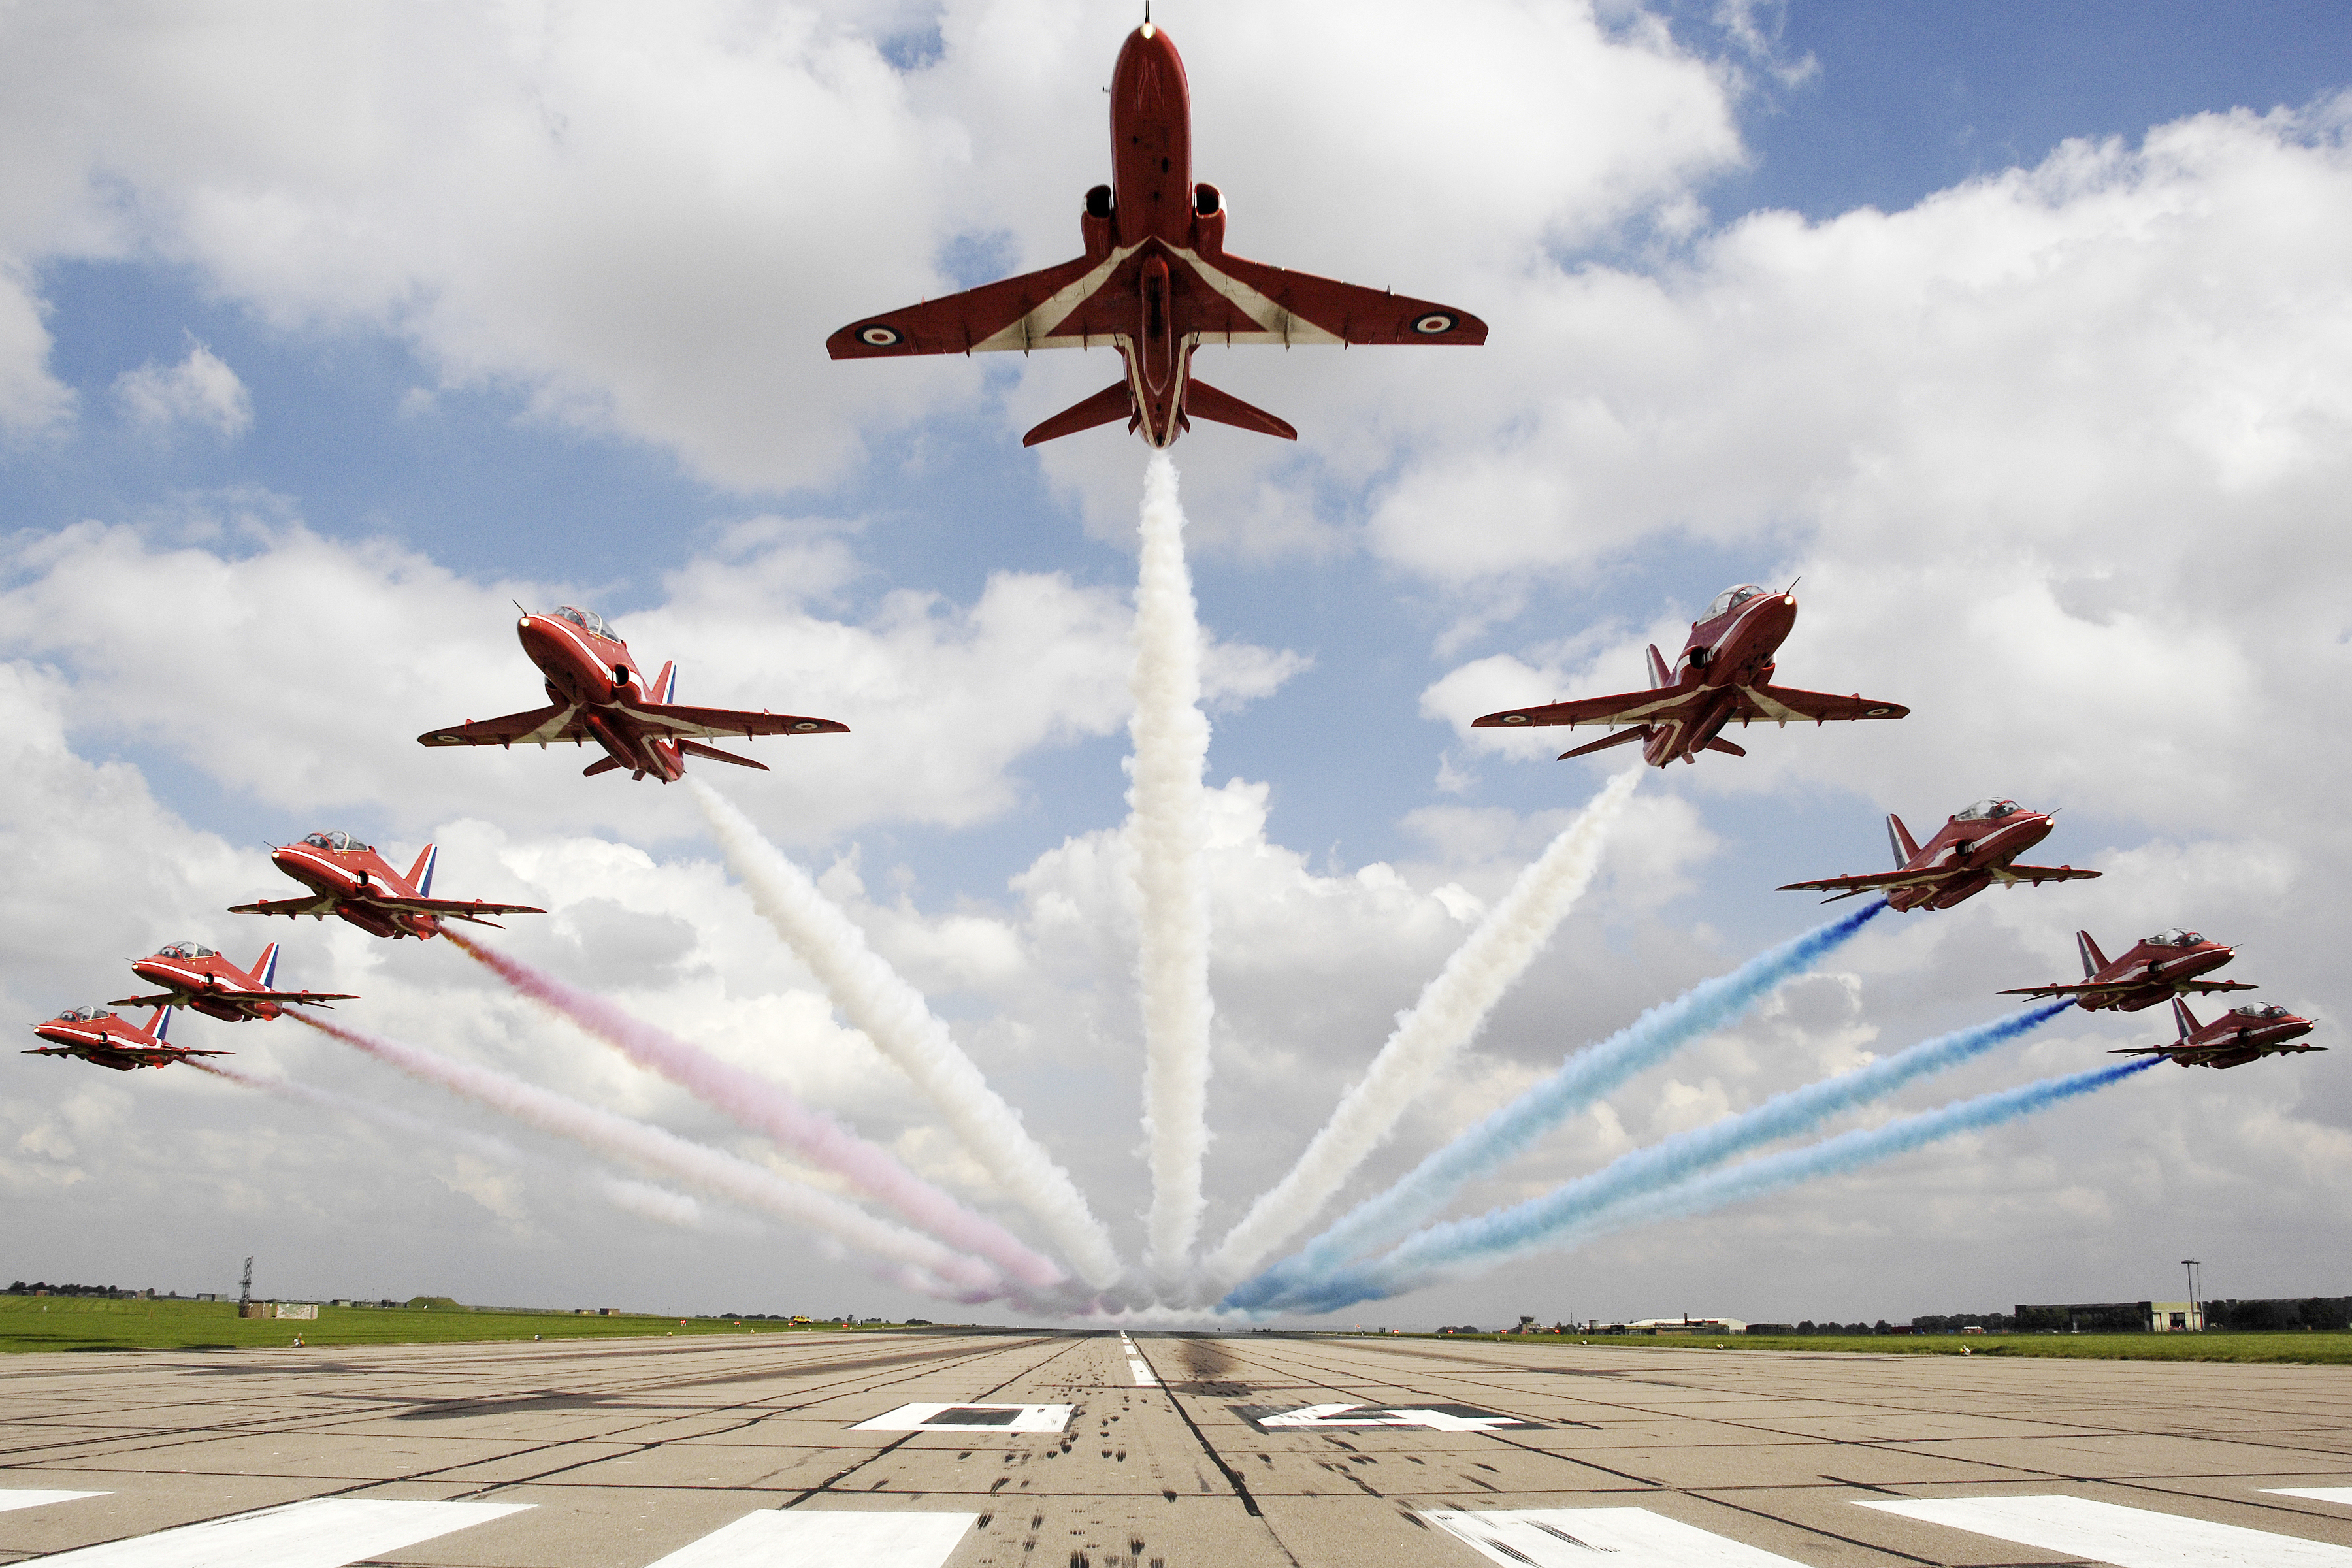 RAF Scampton can claim an important part in the history of the RAF.